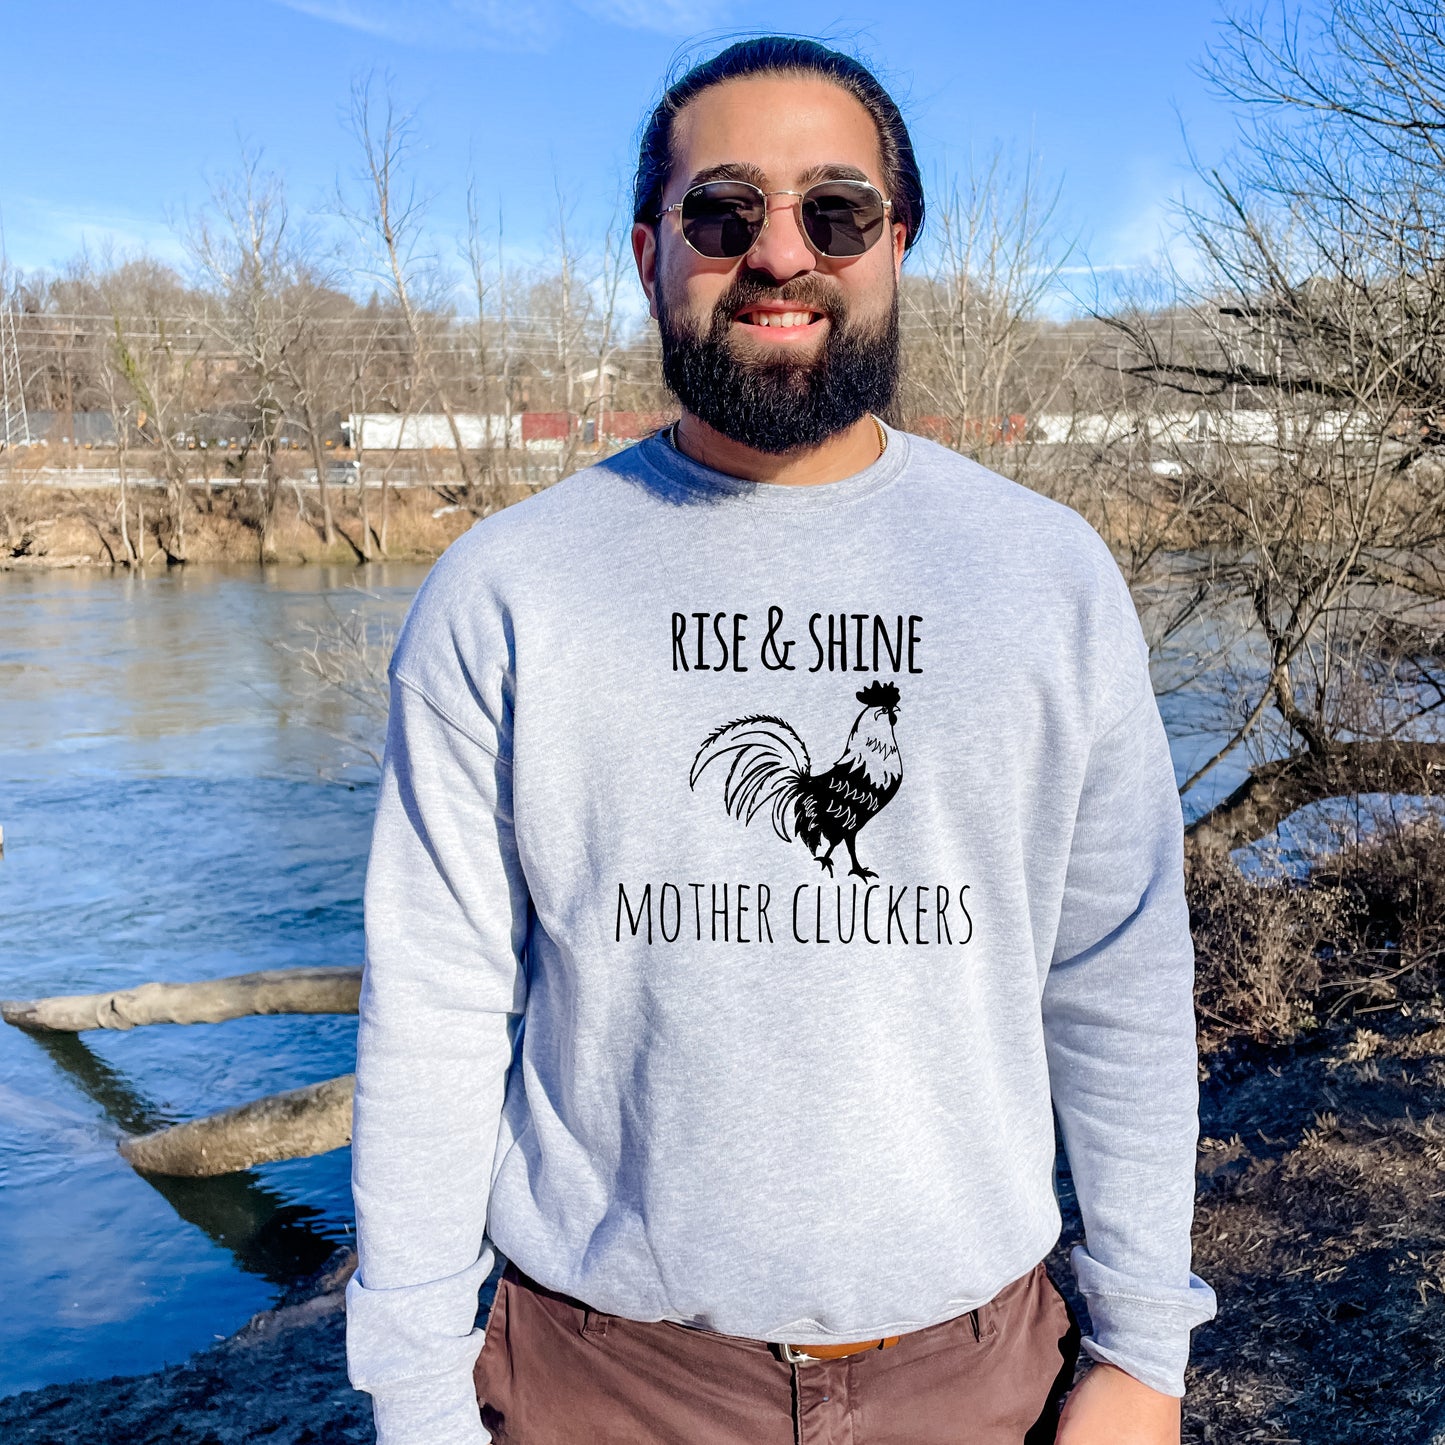 Rise & Shine Mother Cluckers - Unisex Sweatshirt - Heather Gray or Dusty Blue